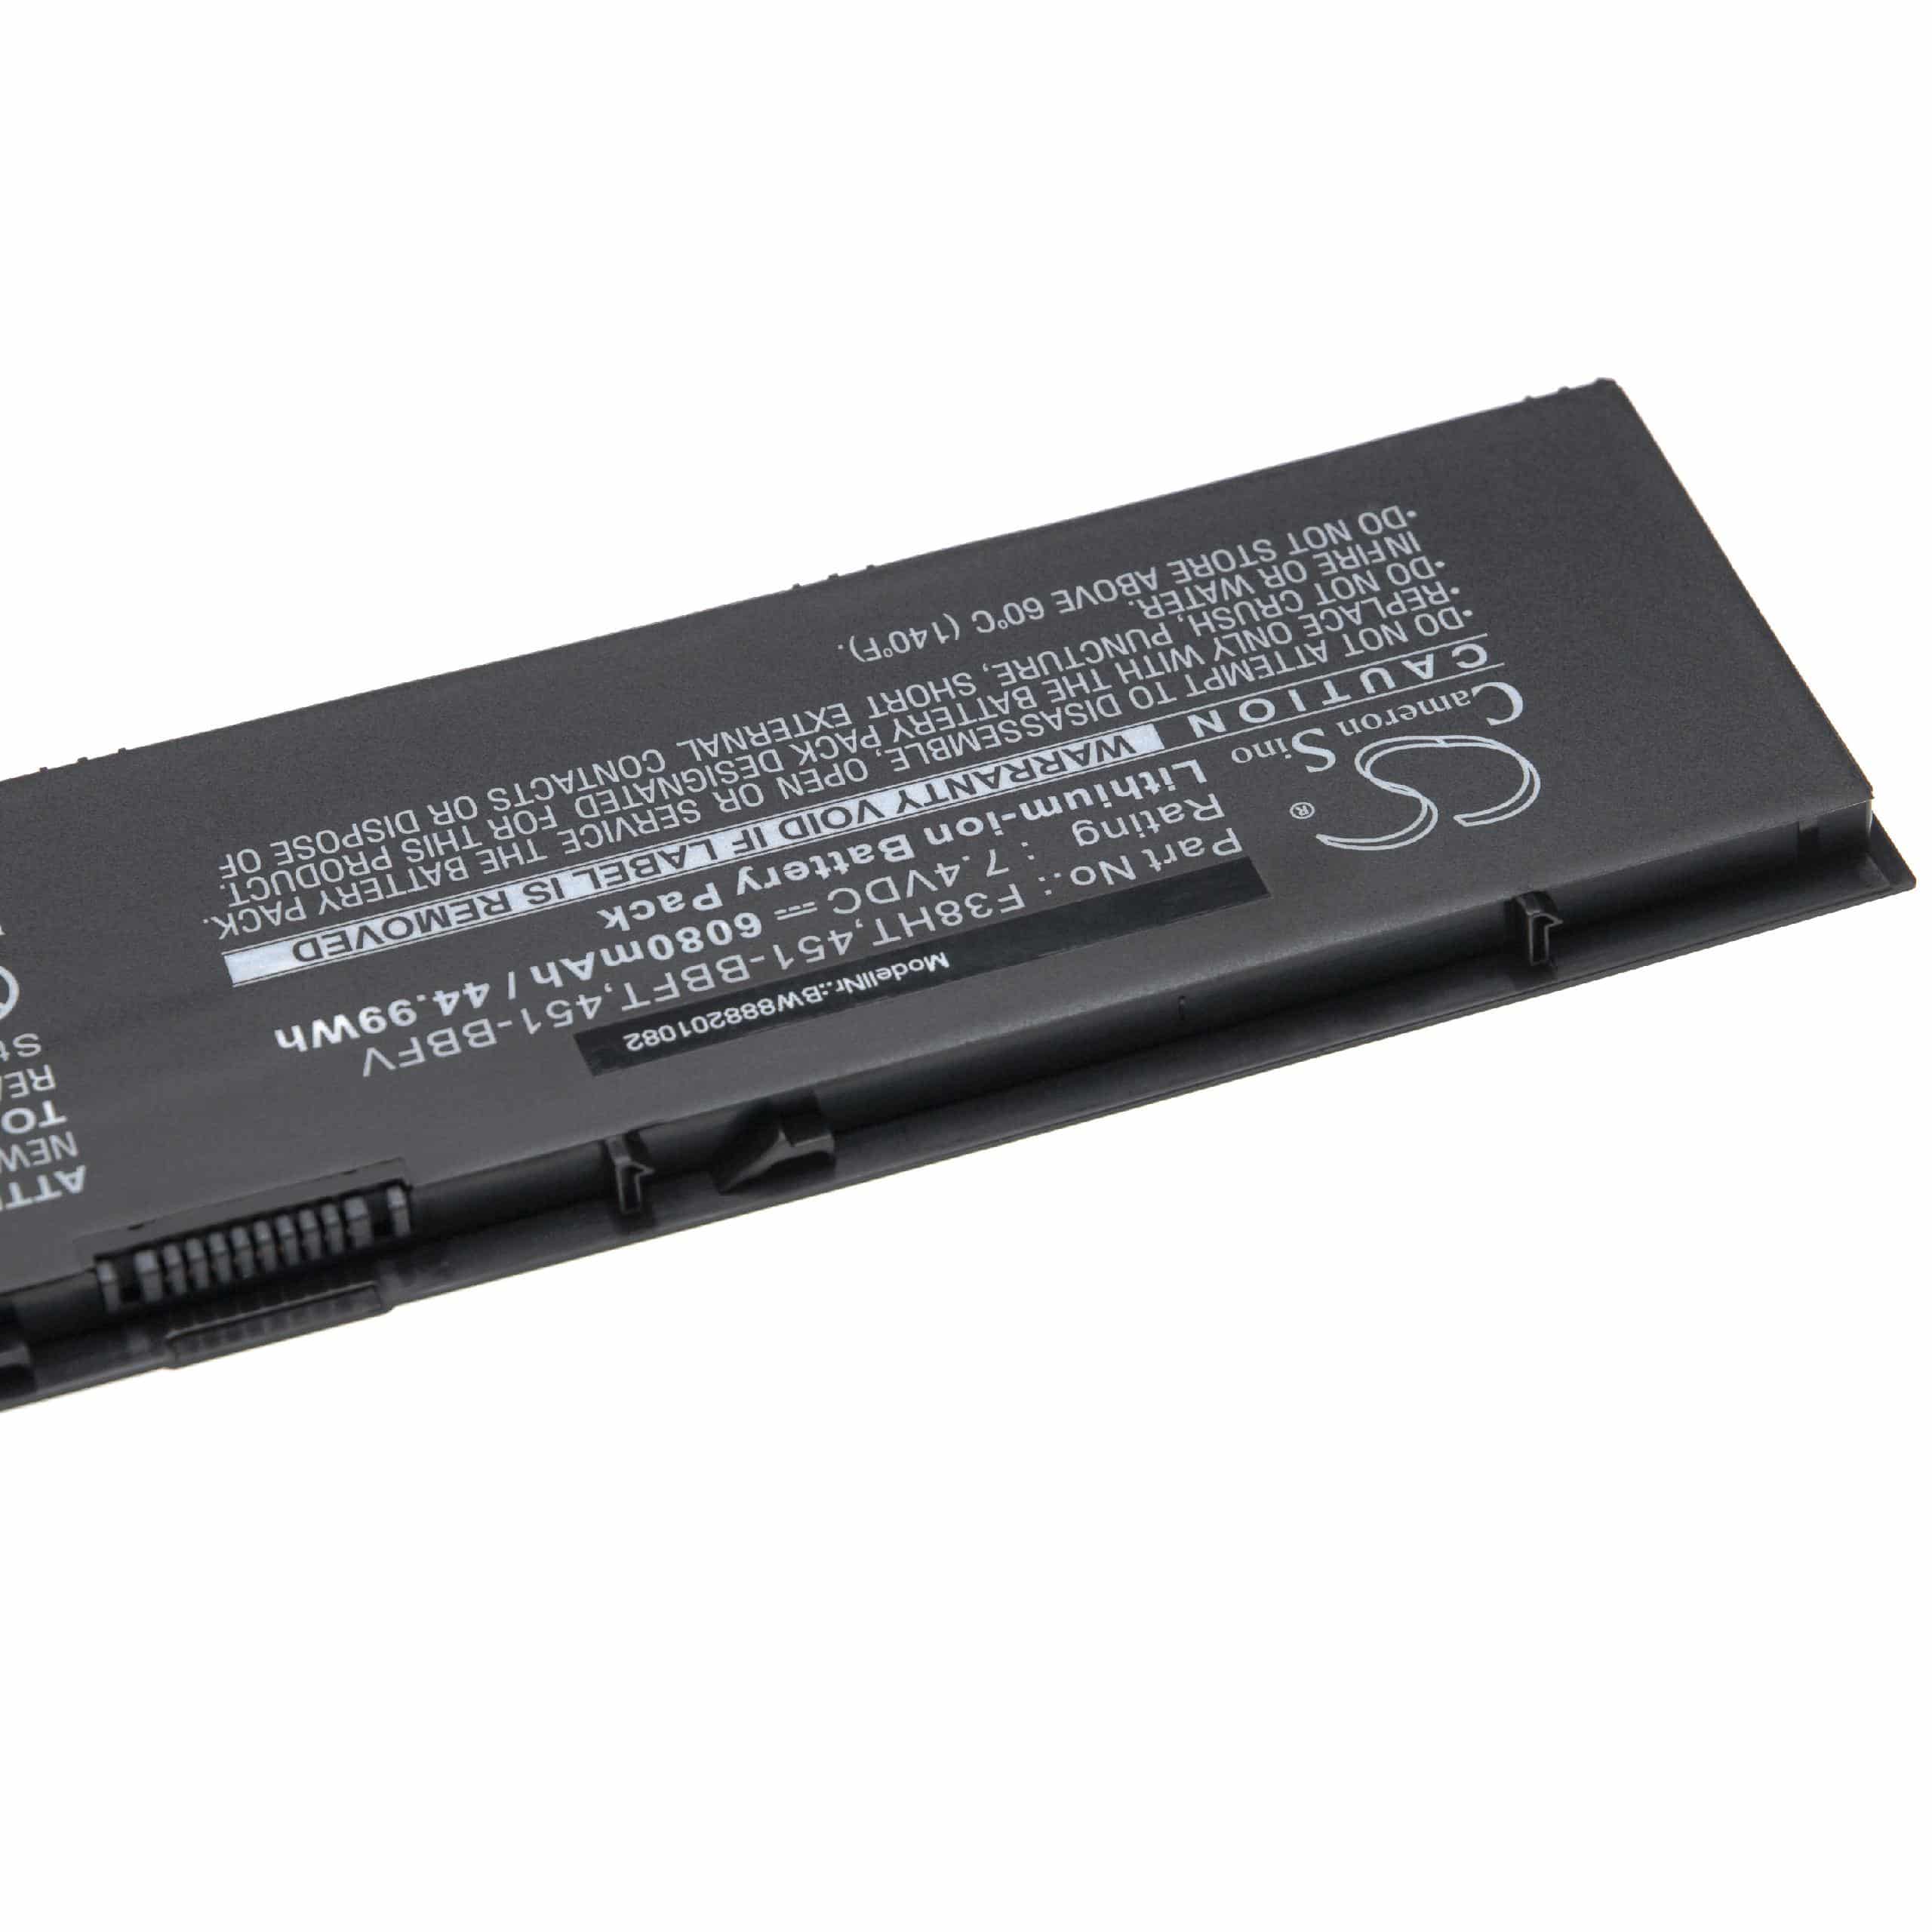 Notebook Battery Replacement for Dell PFXCR, F38HT, 451-BBFY, 34GKR, 451-BBFT - 6080mAh 7.4V Li-Ion, black